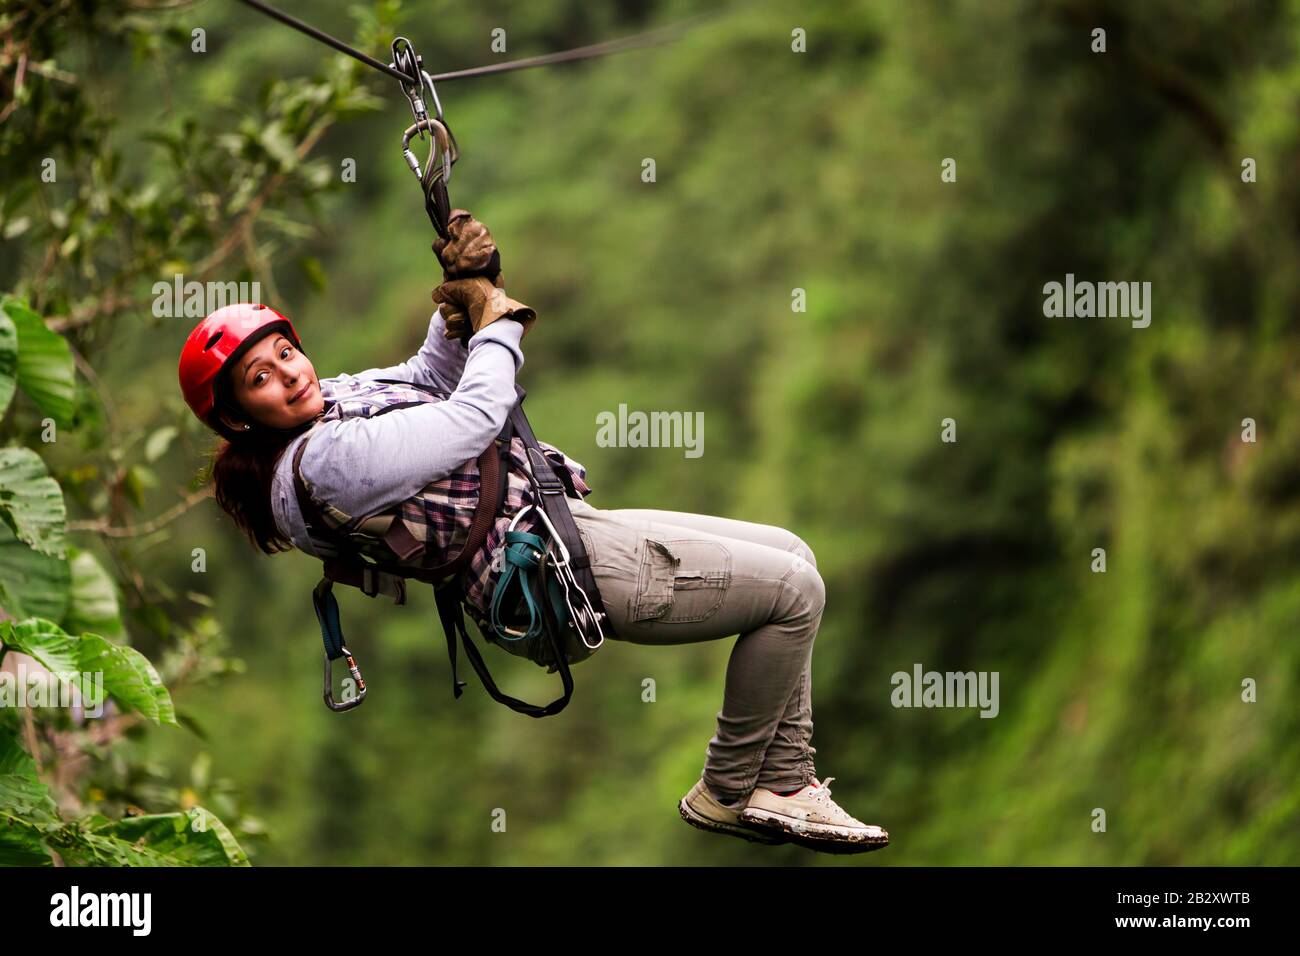 Adult Visitor Wear Casual Suit On Zip Line Trip Selective Focusing Against Fuzzy Forestry Stock Photo